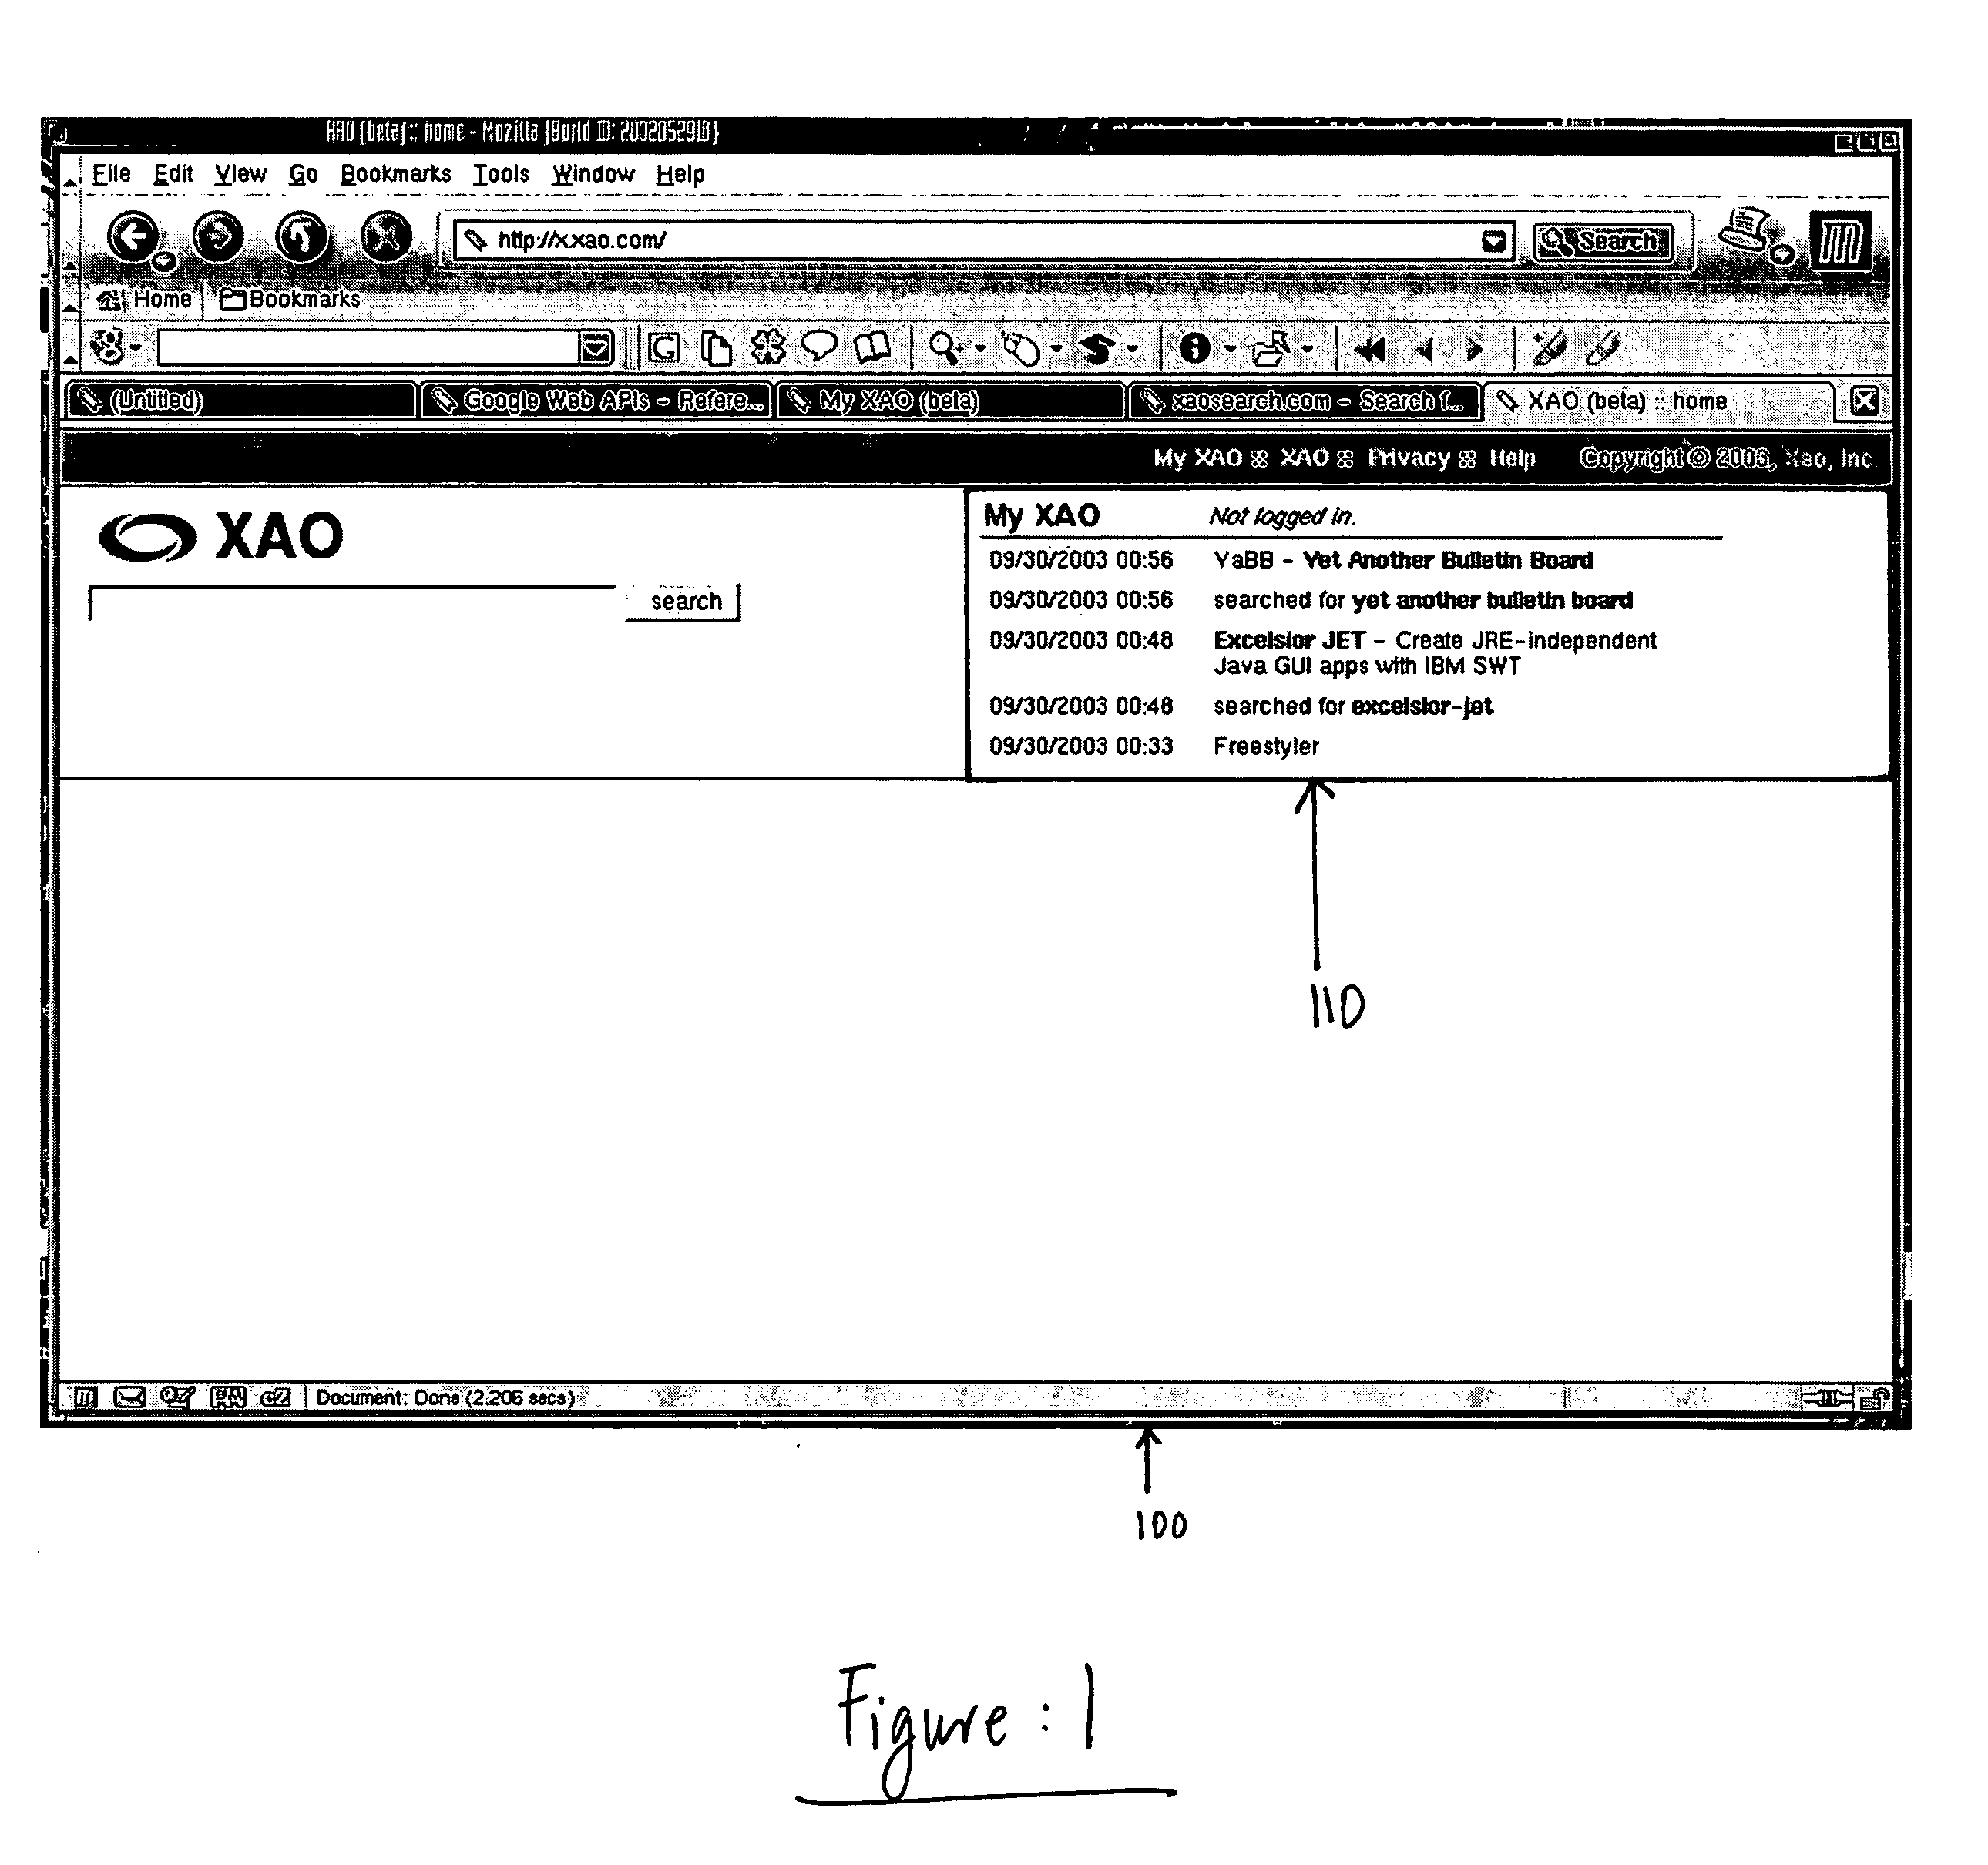 Method for maintaining a record of searches and results